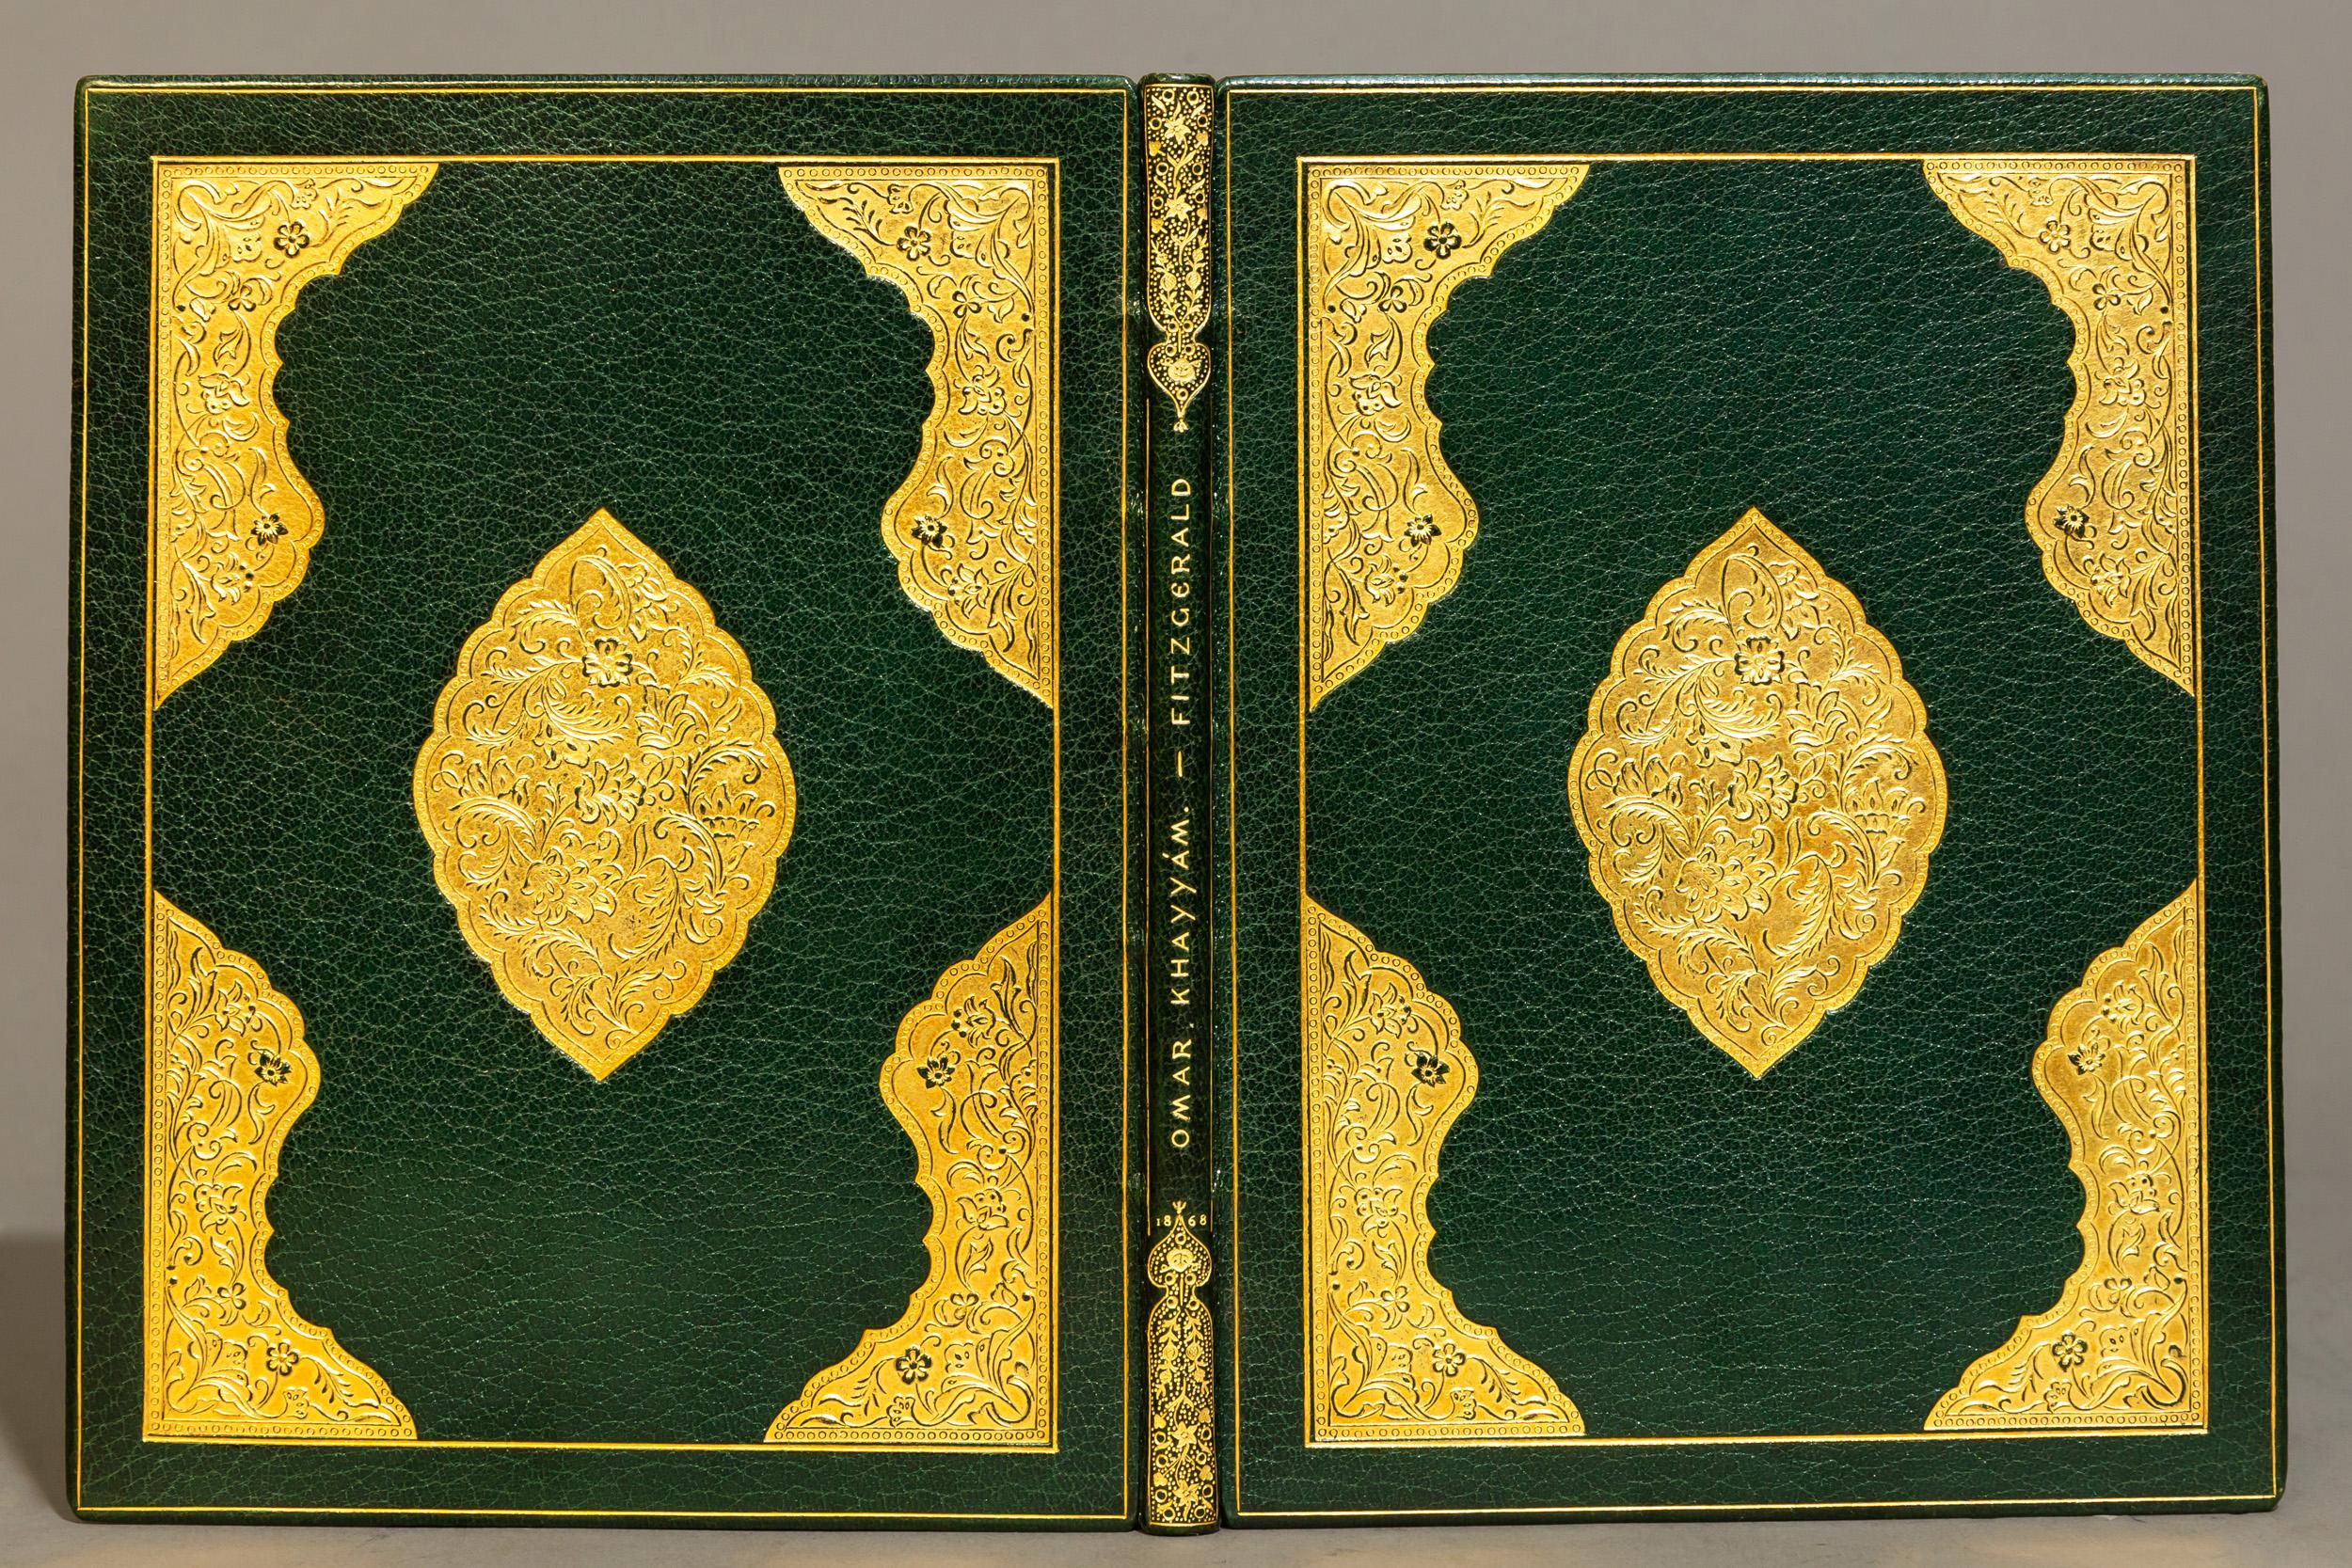 1 Volume

“Second Edition” Exquisitely Bound in full green Morocco by Zaehnsdorf, ornate gilt on covers and spine.

Published: London: Bernard Quaritch 1868 in a soft leather pouch.

Handsome and fine copy.
   
  